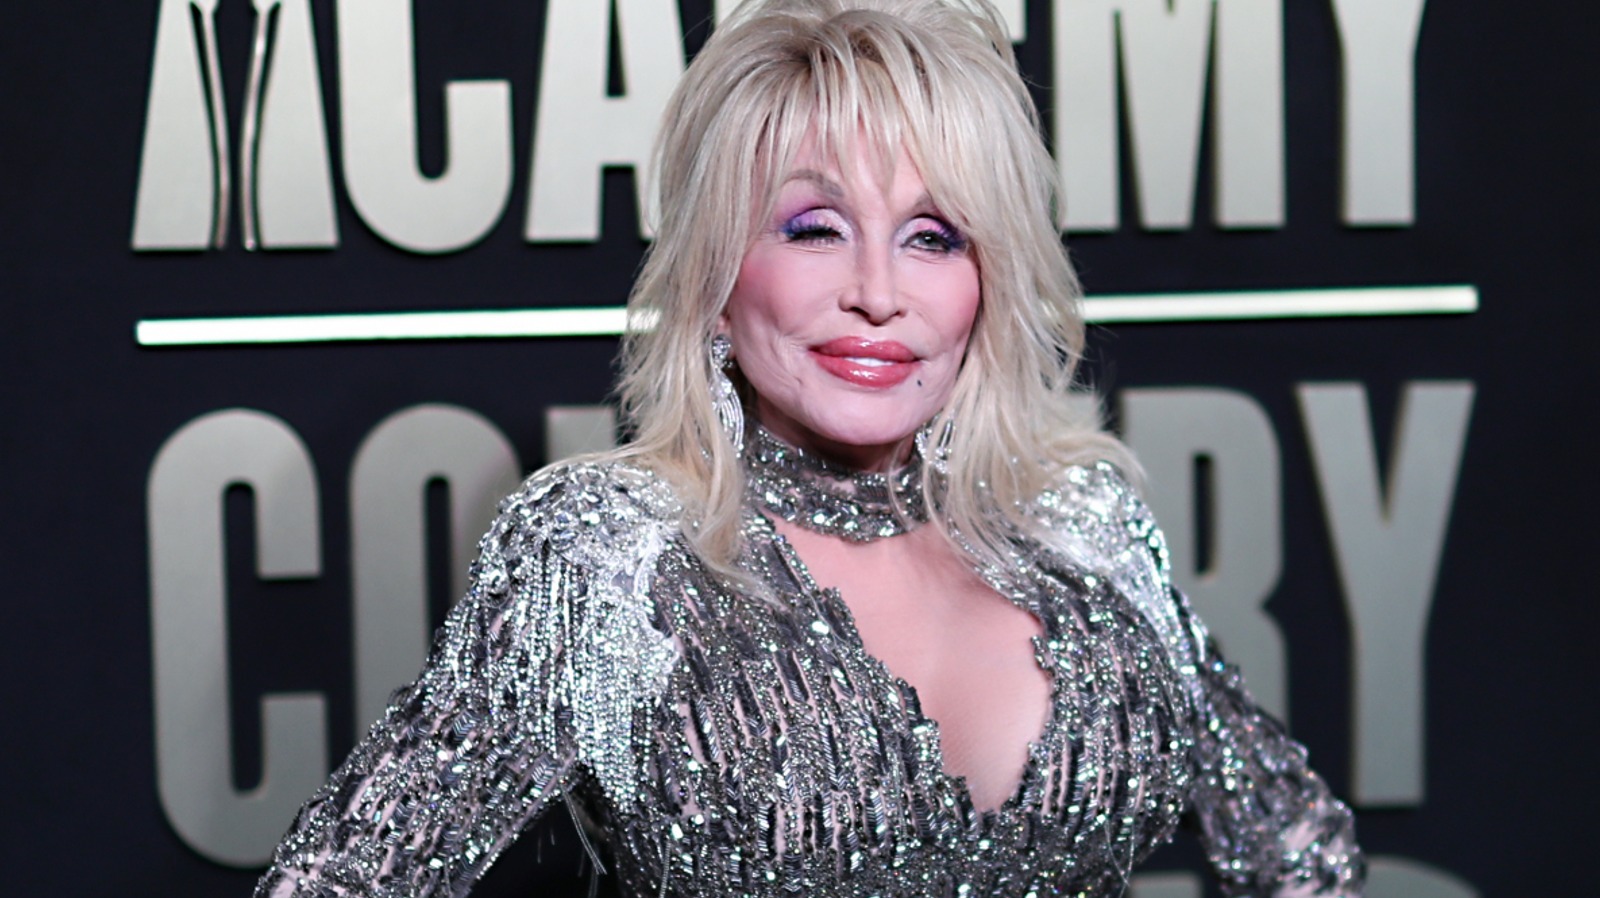 Dolly Parton’s 2023 ACM Awards Look Throws Spring’s Naked Jewelry Trend Out The Window (As It Should) – Glam